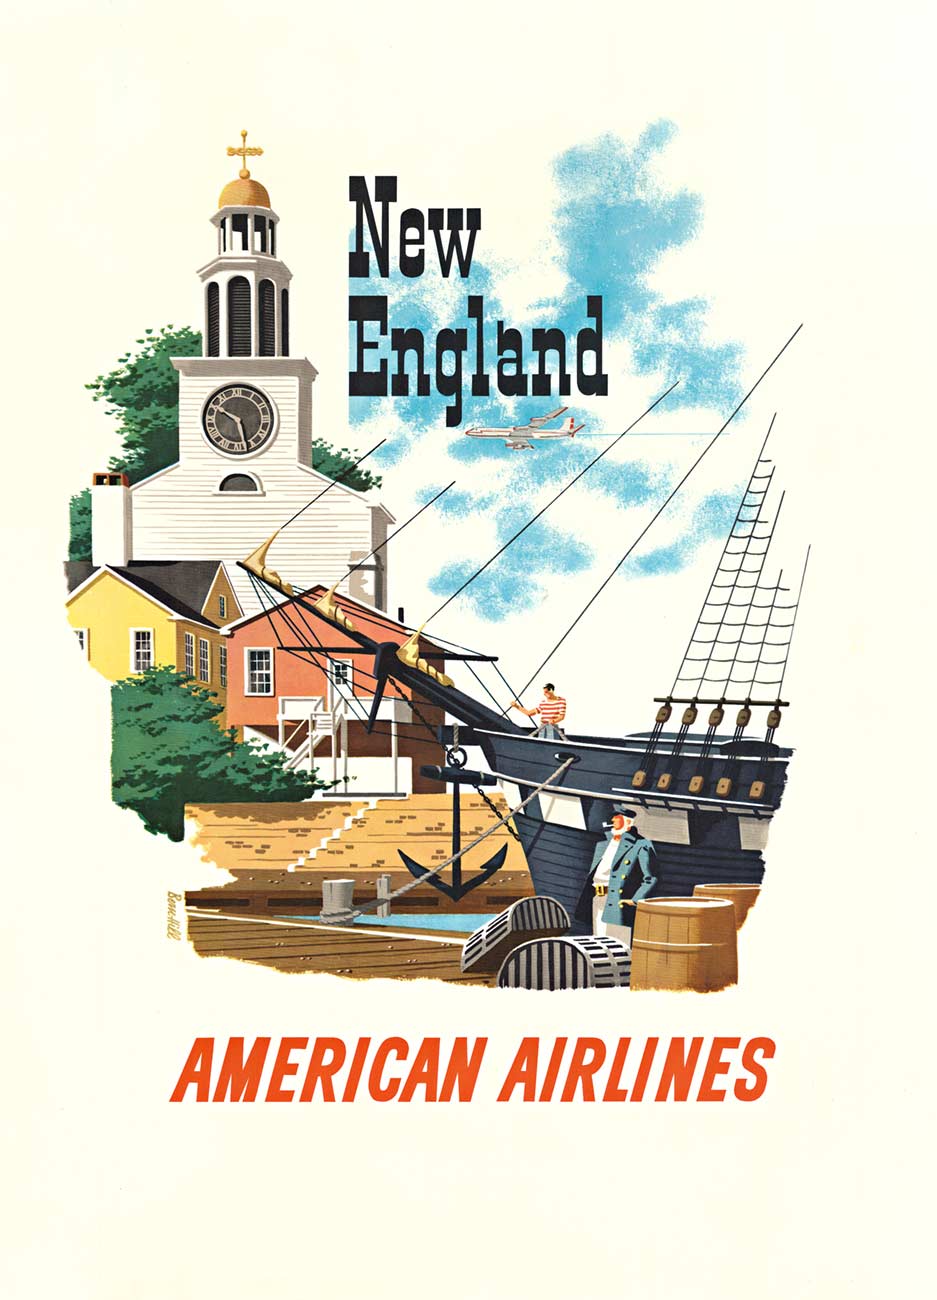 . Designed by Bern Hill, this artwork showcases a serene image of a ship docked at port and a majestic bell tower, depicting the charm and beauty of New England.